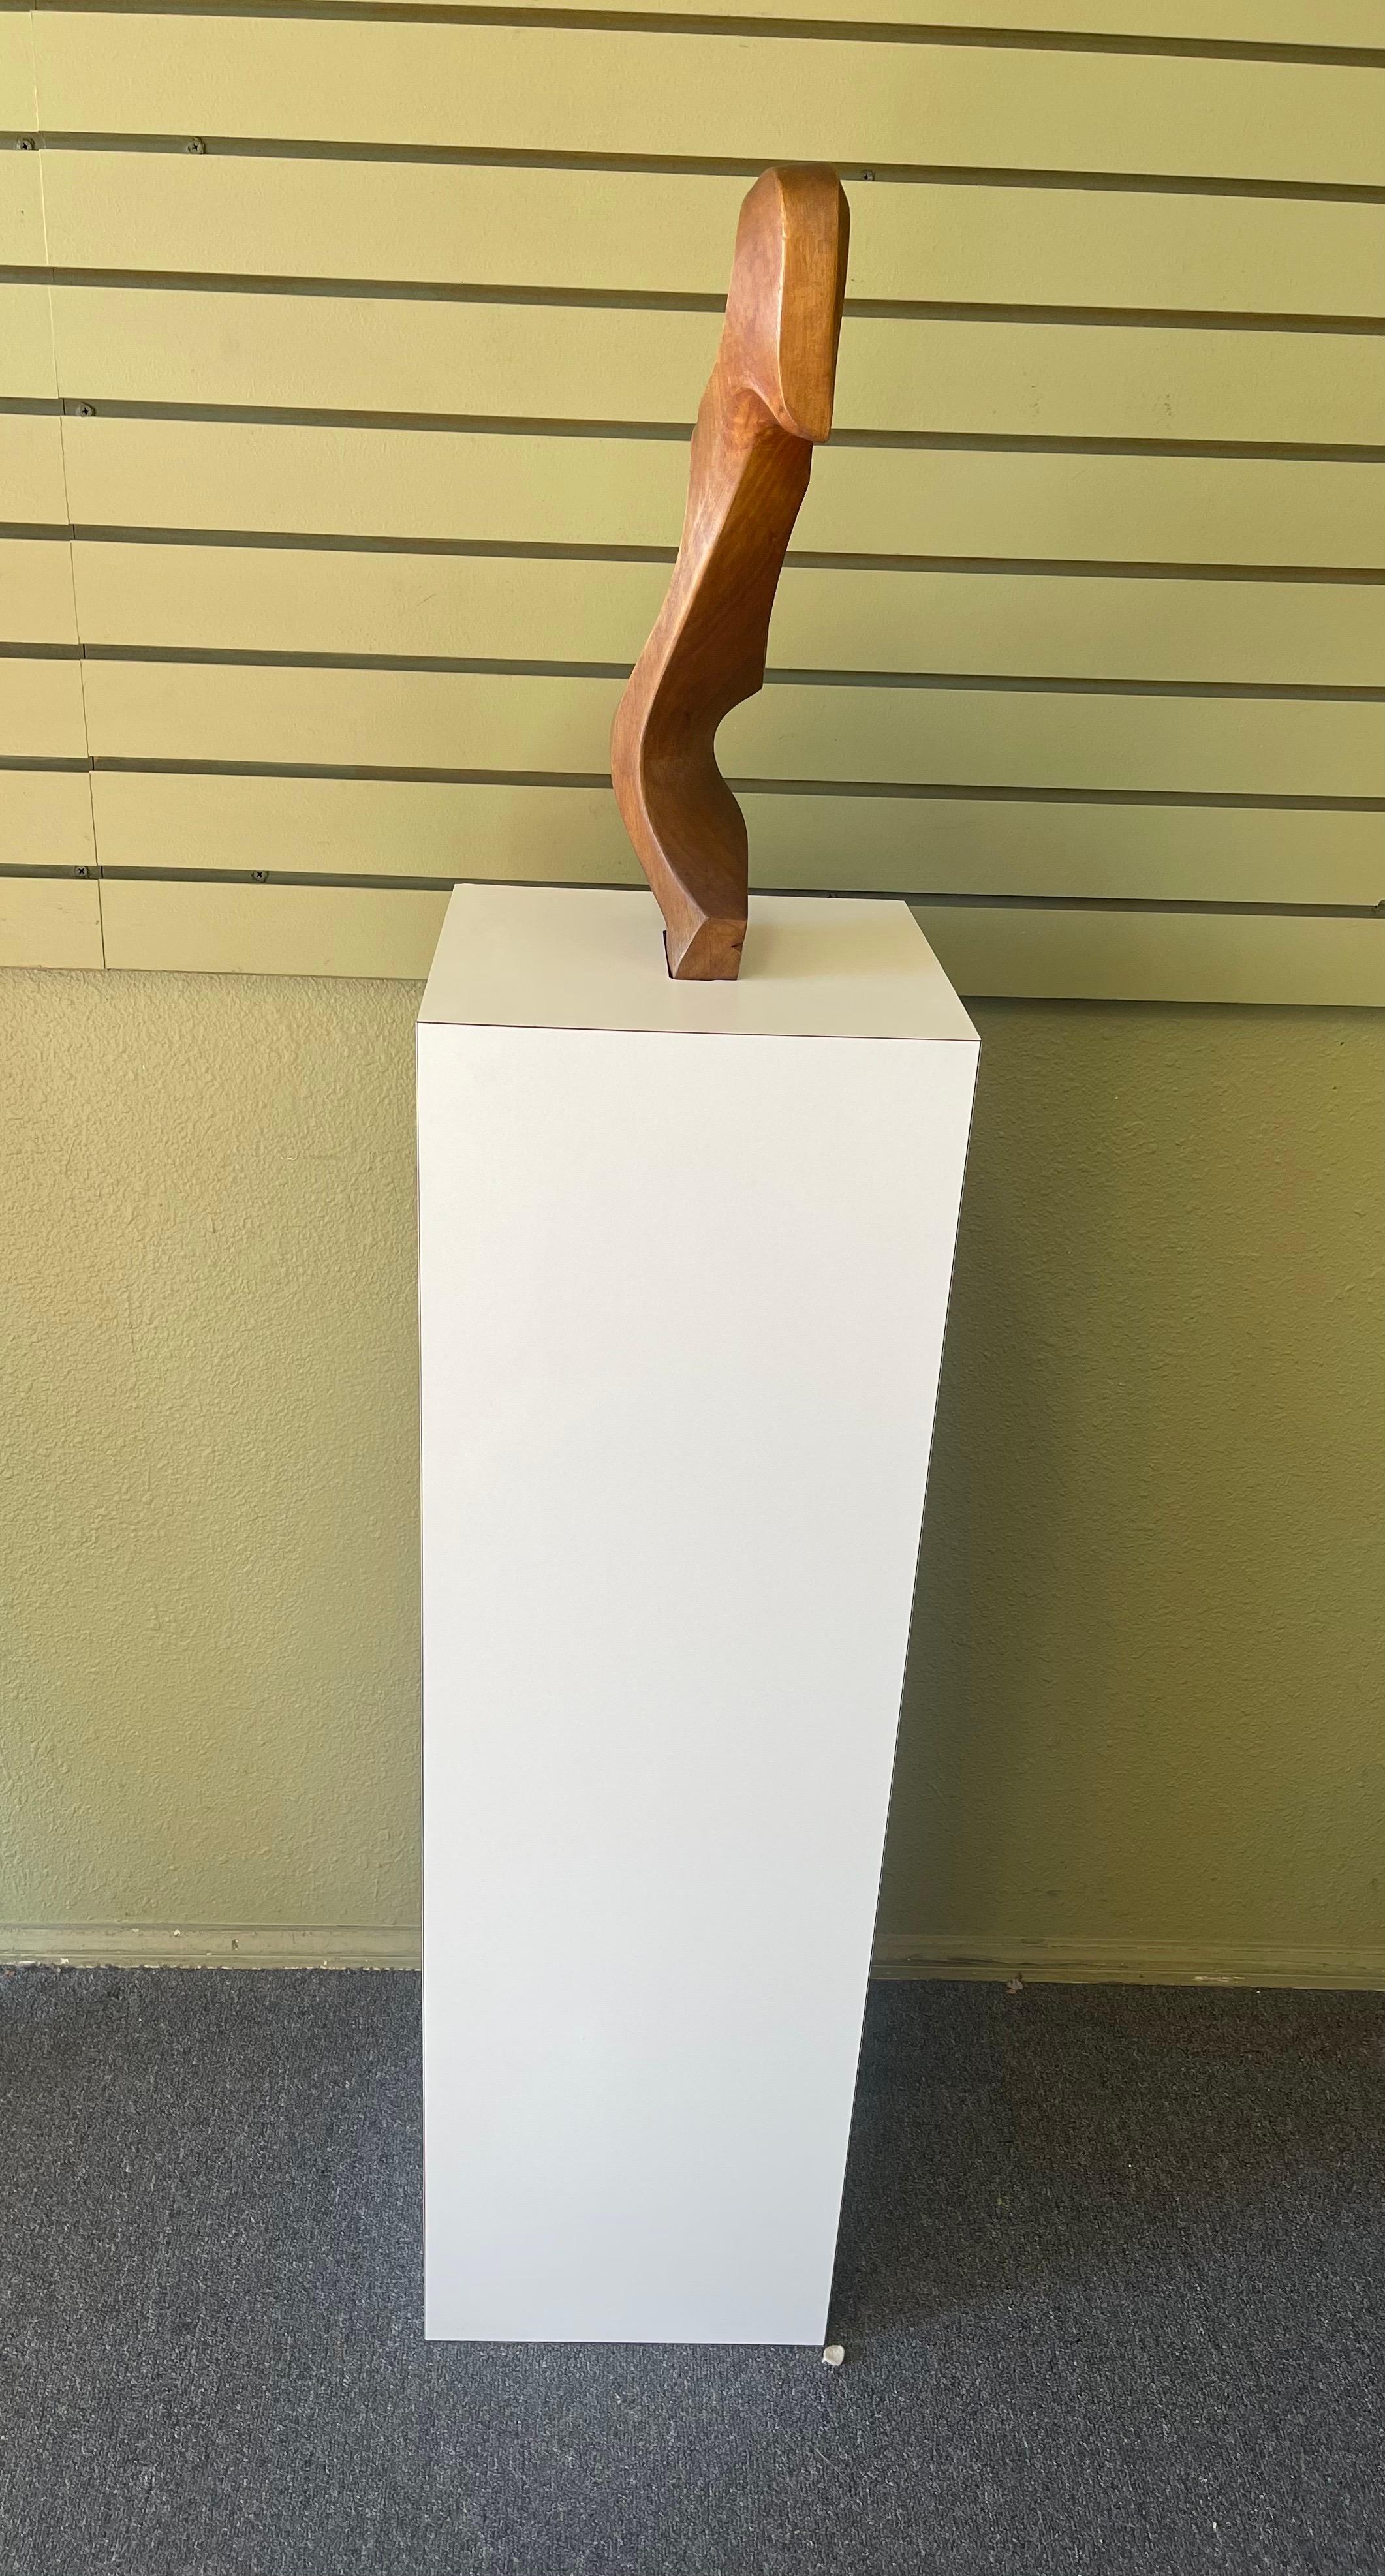 Venetian Abstract Solid Walnut Forcola 'Oarlock' Sculpture by Giuseppe Carli In Good Condition For Sale In San Diego, CA